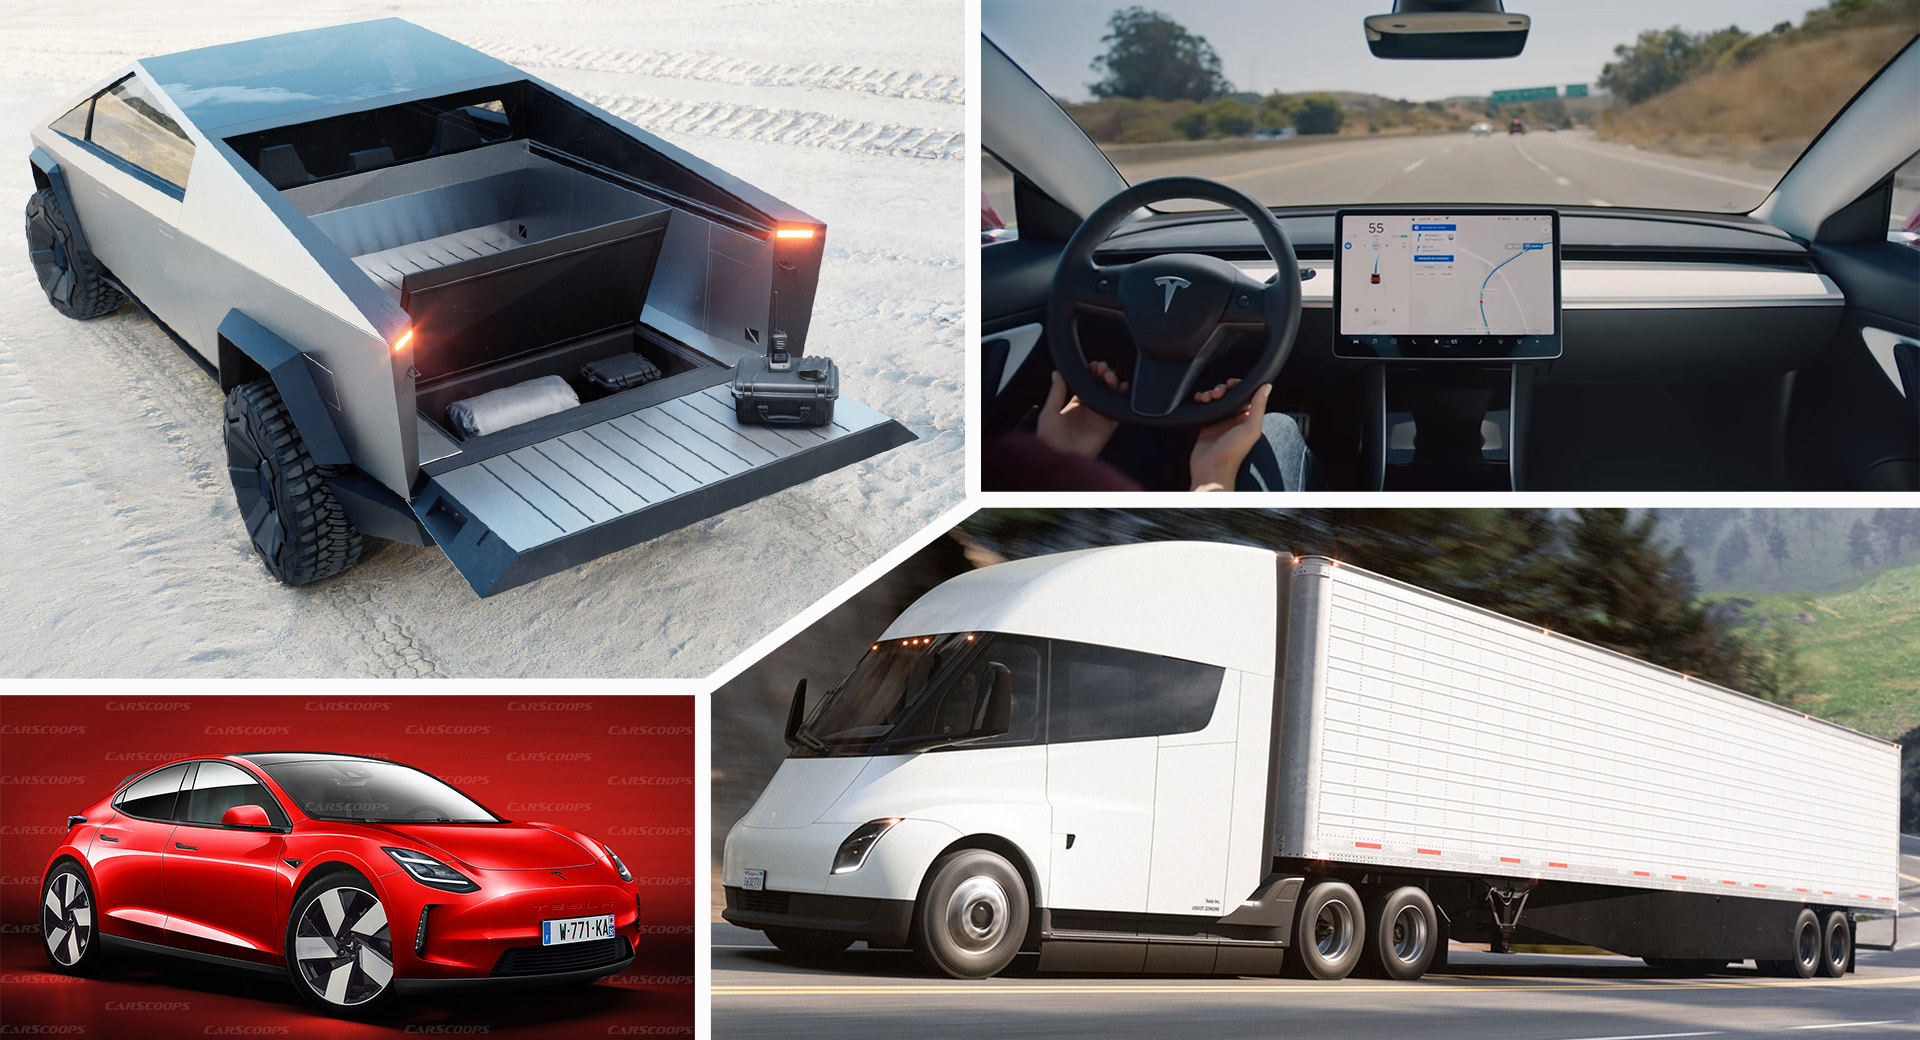 Tesla Future Cars: Here's What's Coming And When, From Cybertruck